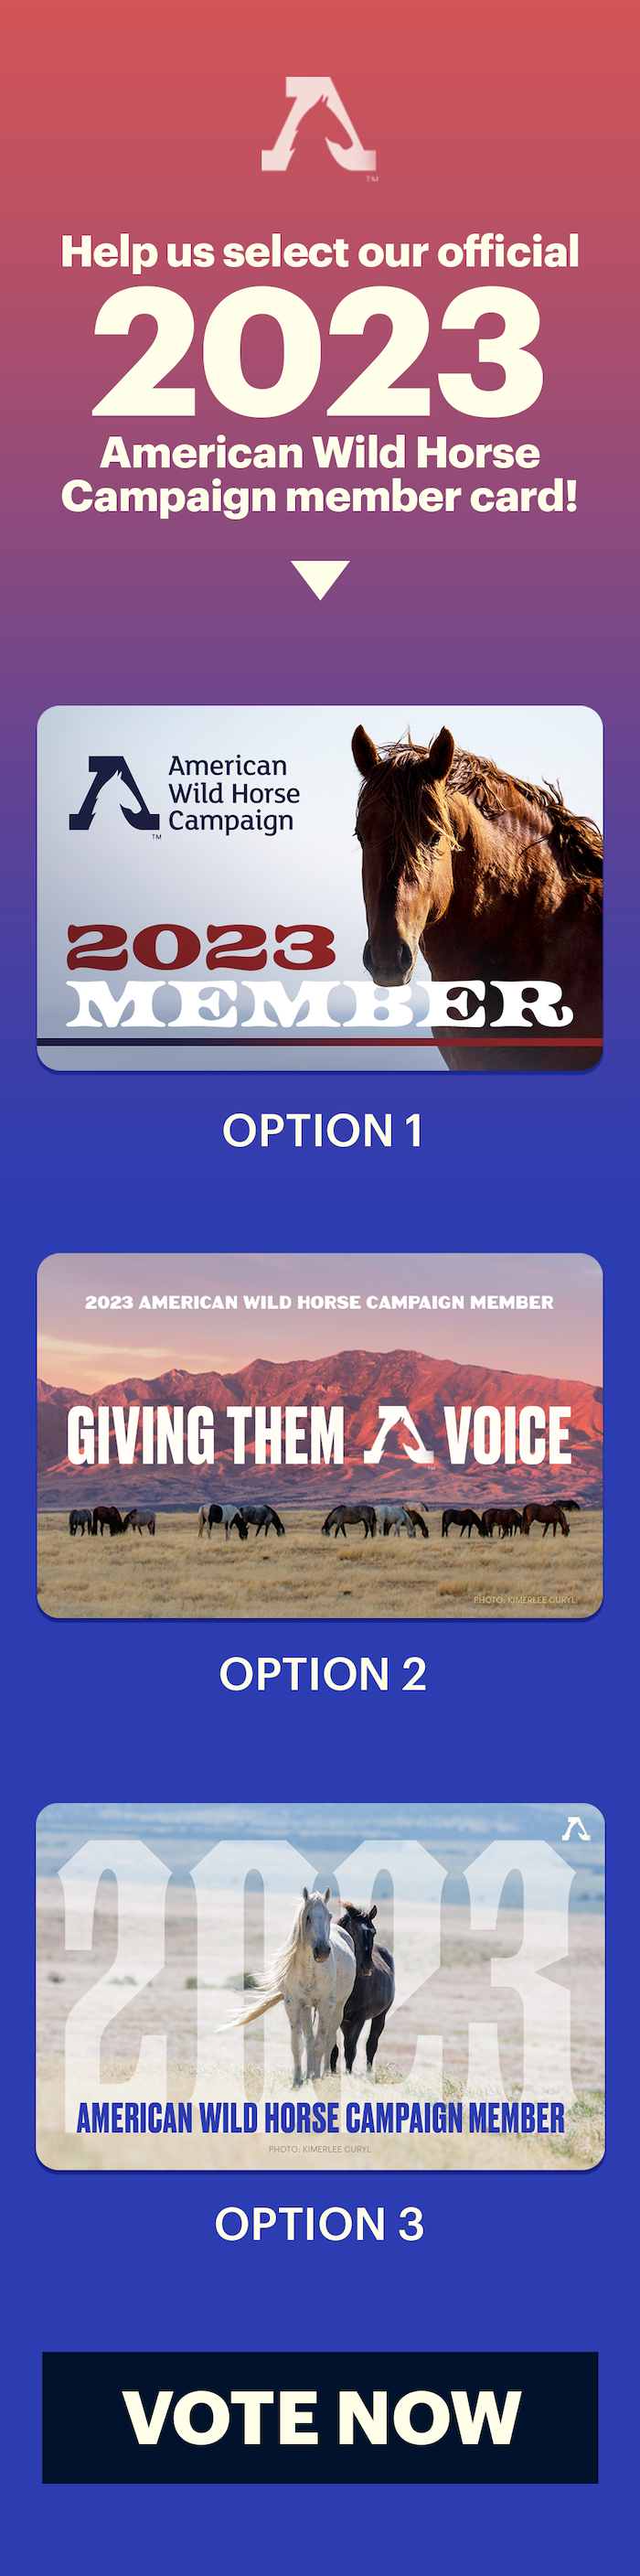 Help us select our Official 2023 American Wild Horse Campaign member card. [[Shows each of 3 options: Option 1 shows a brown mustang looking head on into the camera and says "2023 Member" Option 2 shows a dozen mustangs grazing in the field in the sunset and says "Giving Them A Voice" and Option 3 has a big "2023" in the background and shows a brown and a white stallion running towards the camera]] VOTE NOW!